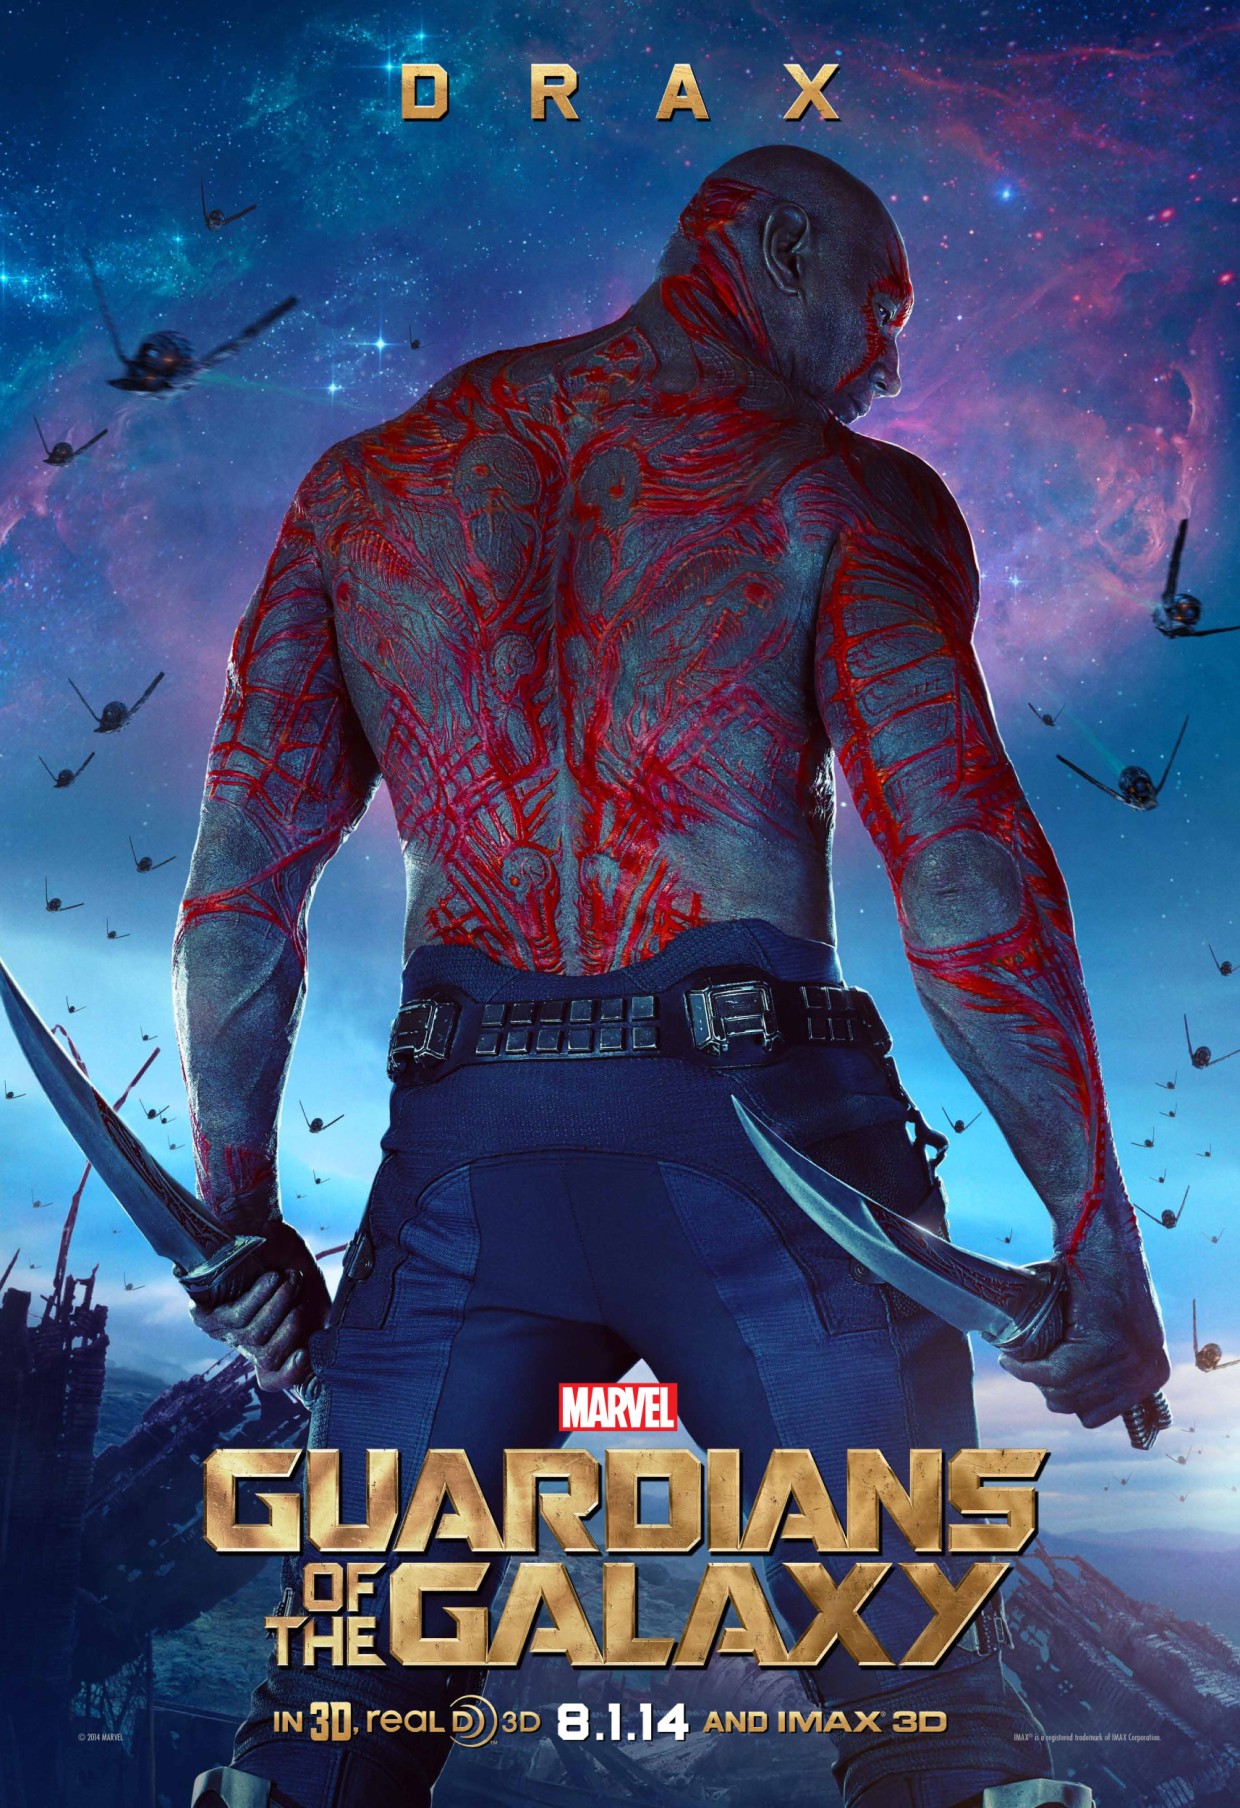 Two New ‘Guardians of the Galaxy’ Character Posters Featuring Star-Lord ...